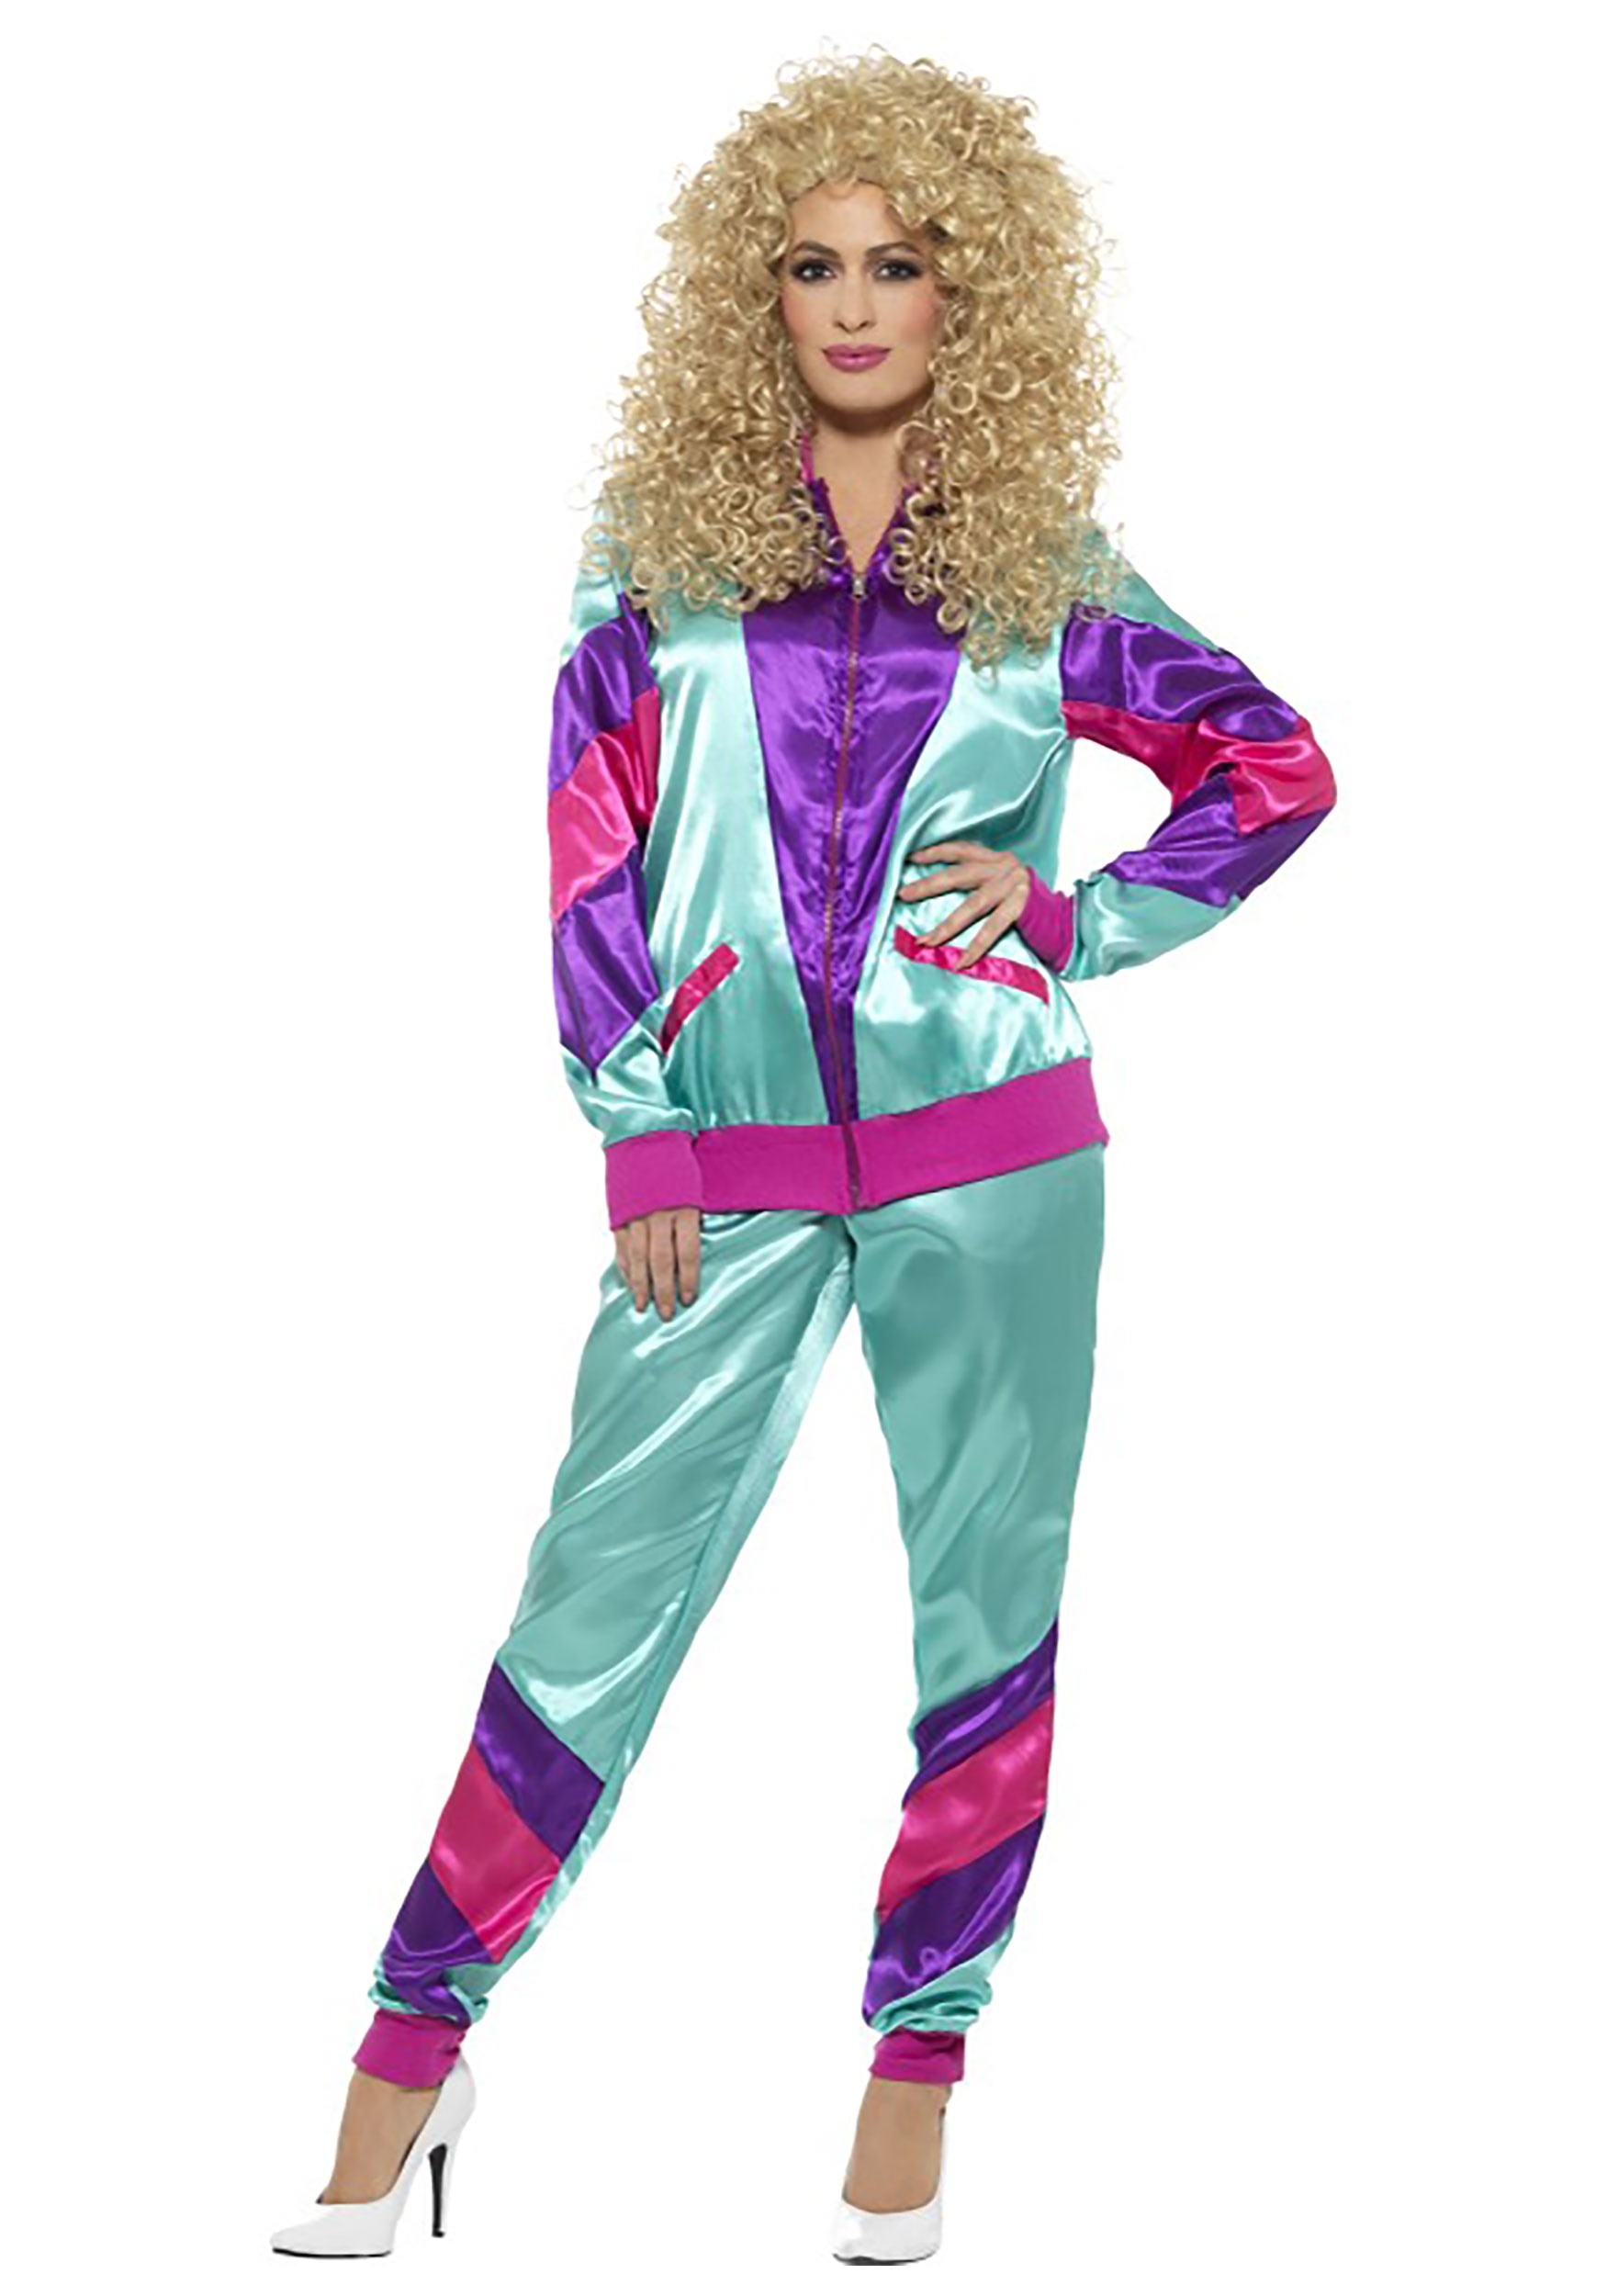 https://images.halloweencostumes.ca/products/42155/1-1/womens-80s-tracksuit-costume.jpg